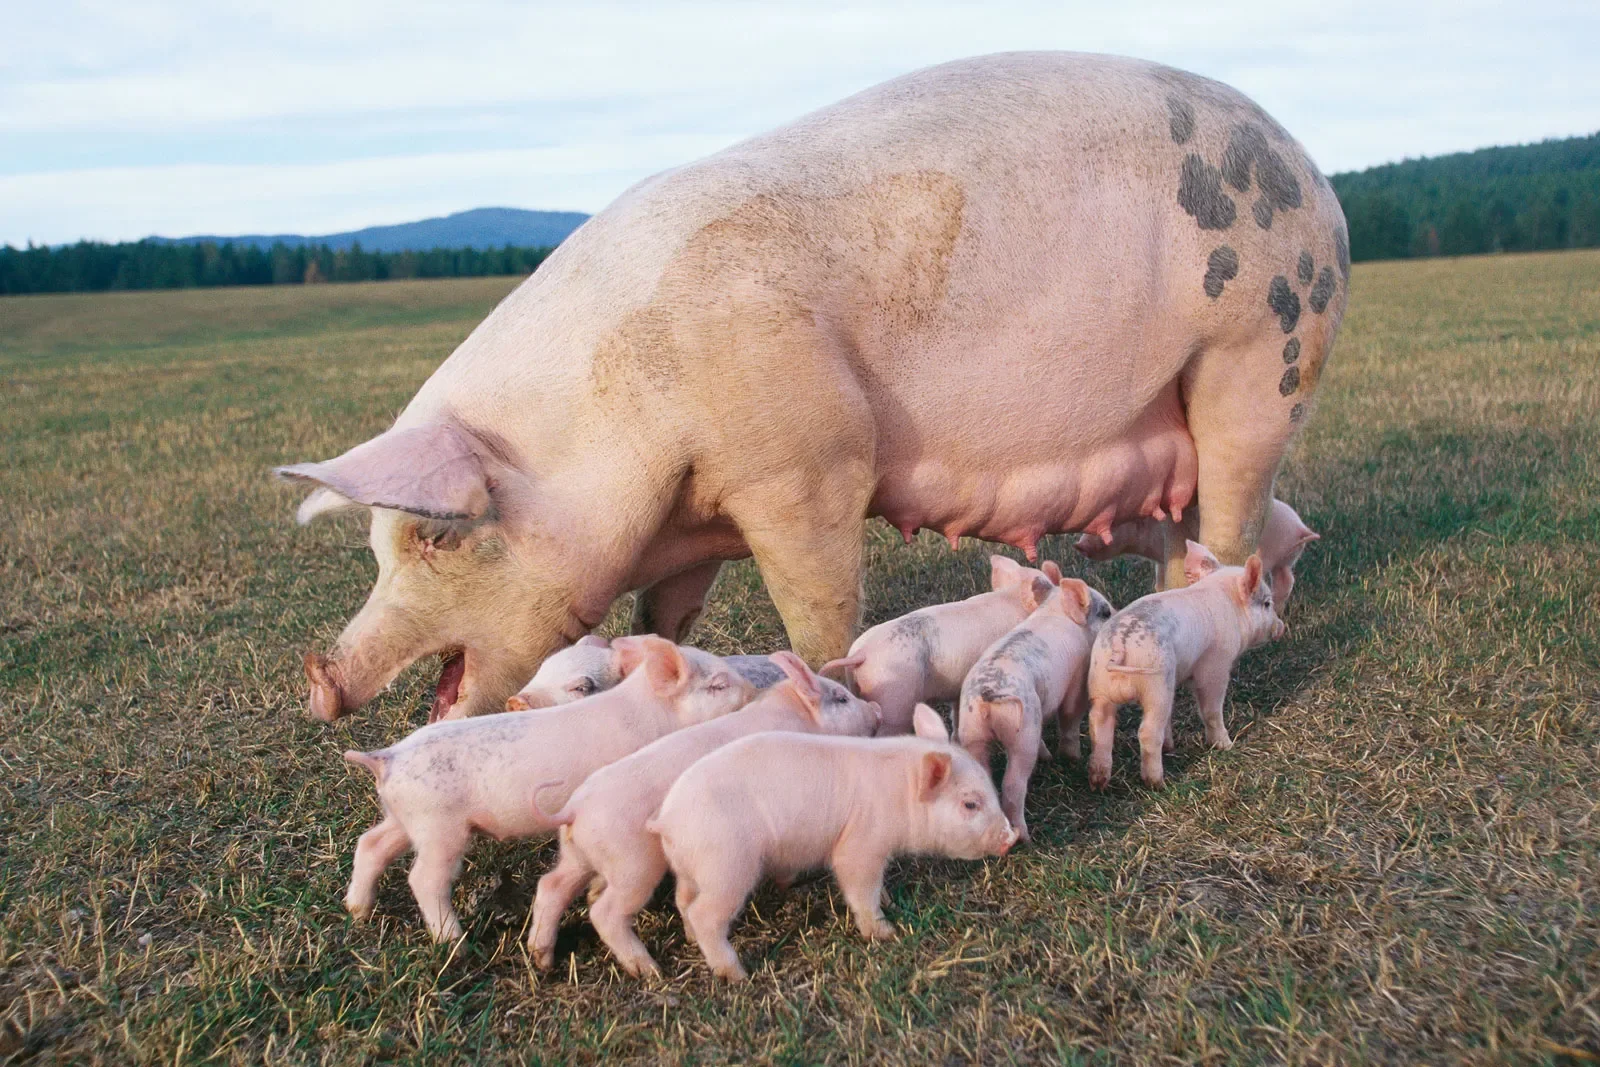 Swine, female pigs can have as many as 20 piglets in a litter. Encyclopedia Brittanica.